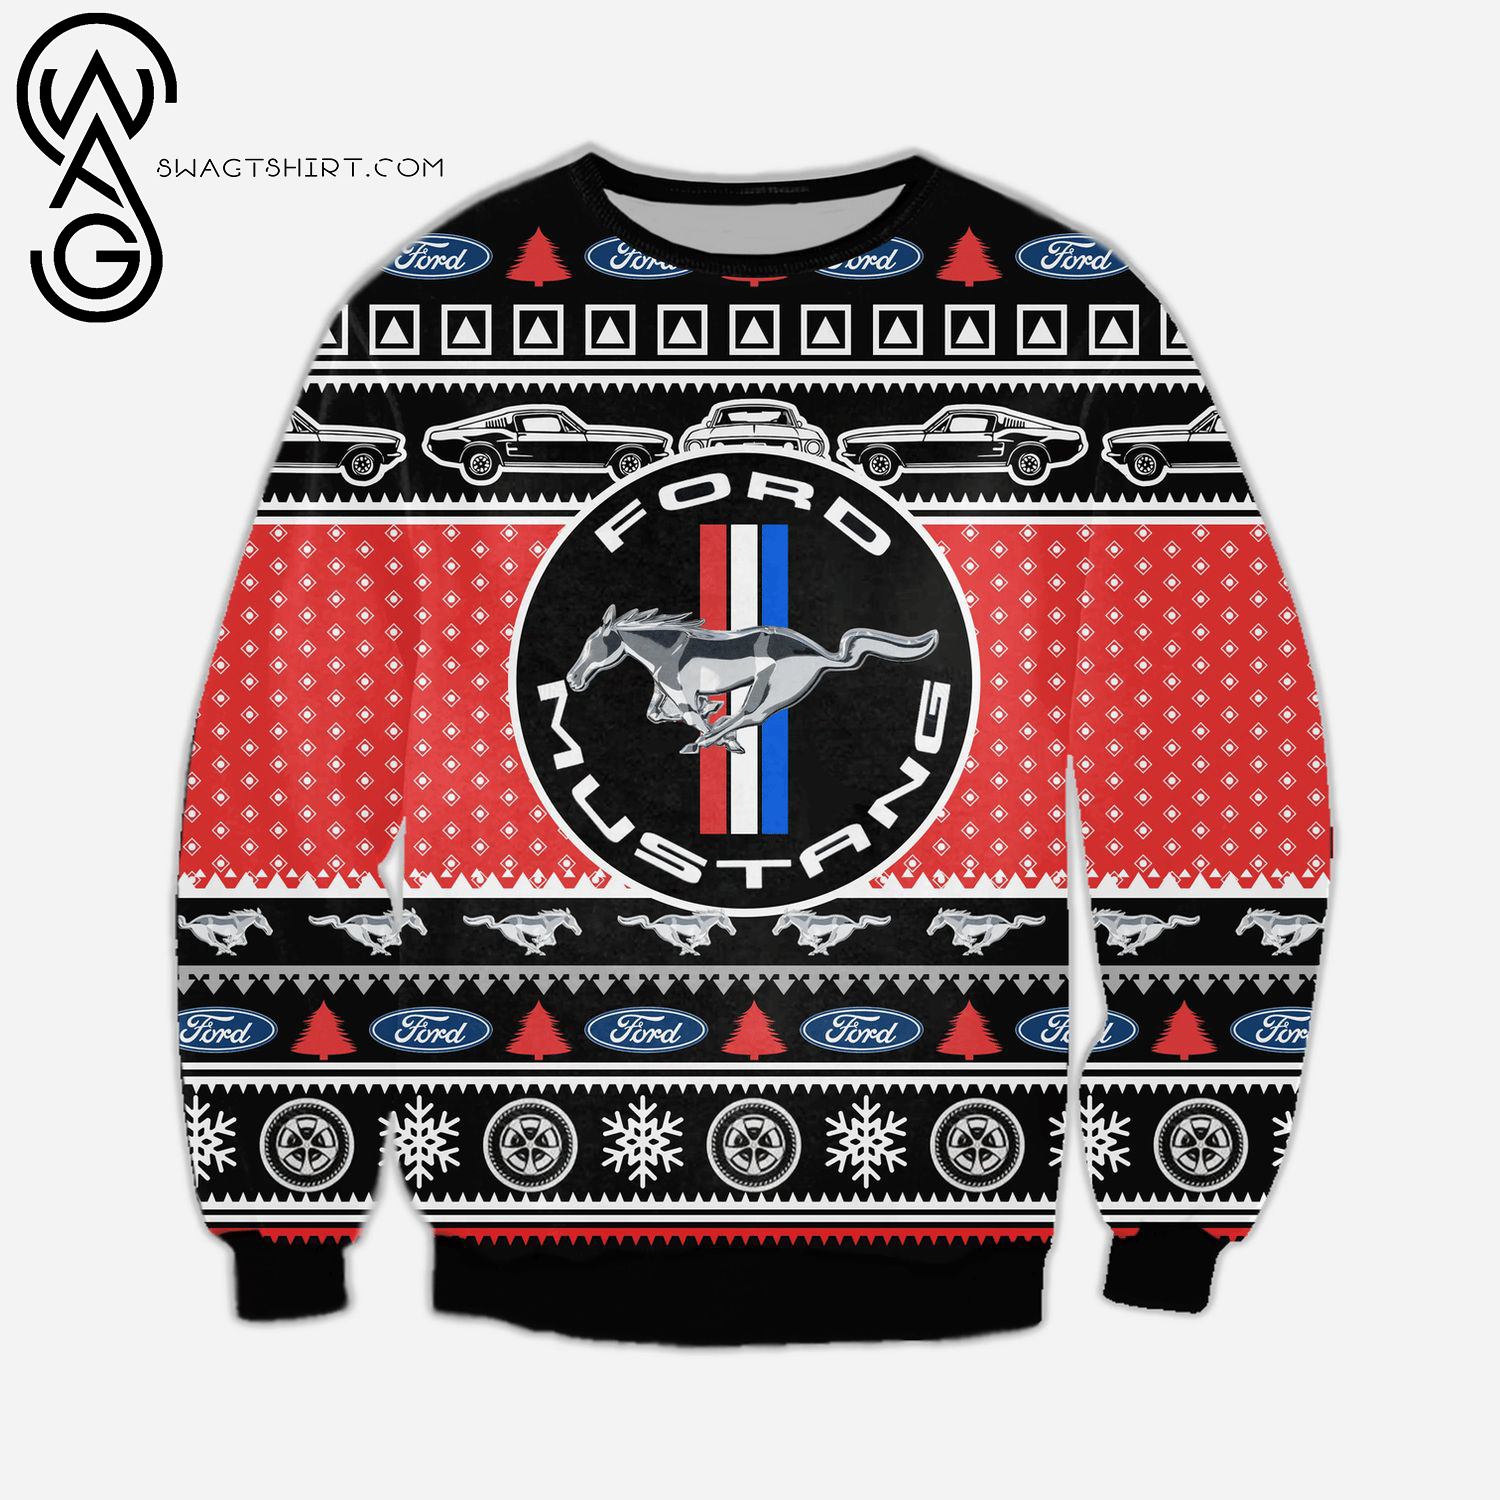 The Ford Mustang Full Print Ugly Christmas Sweater